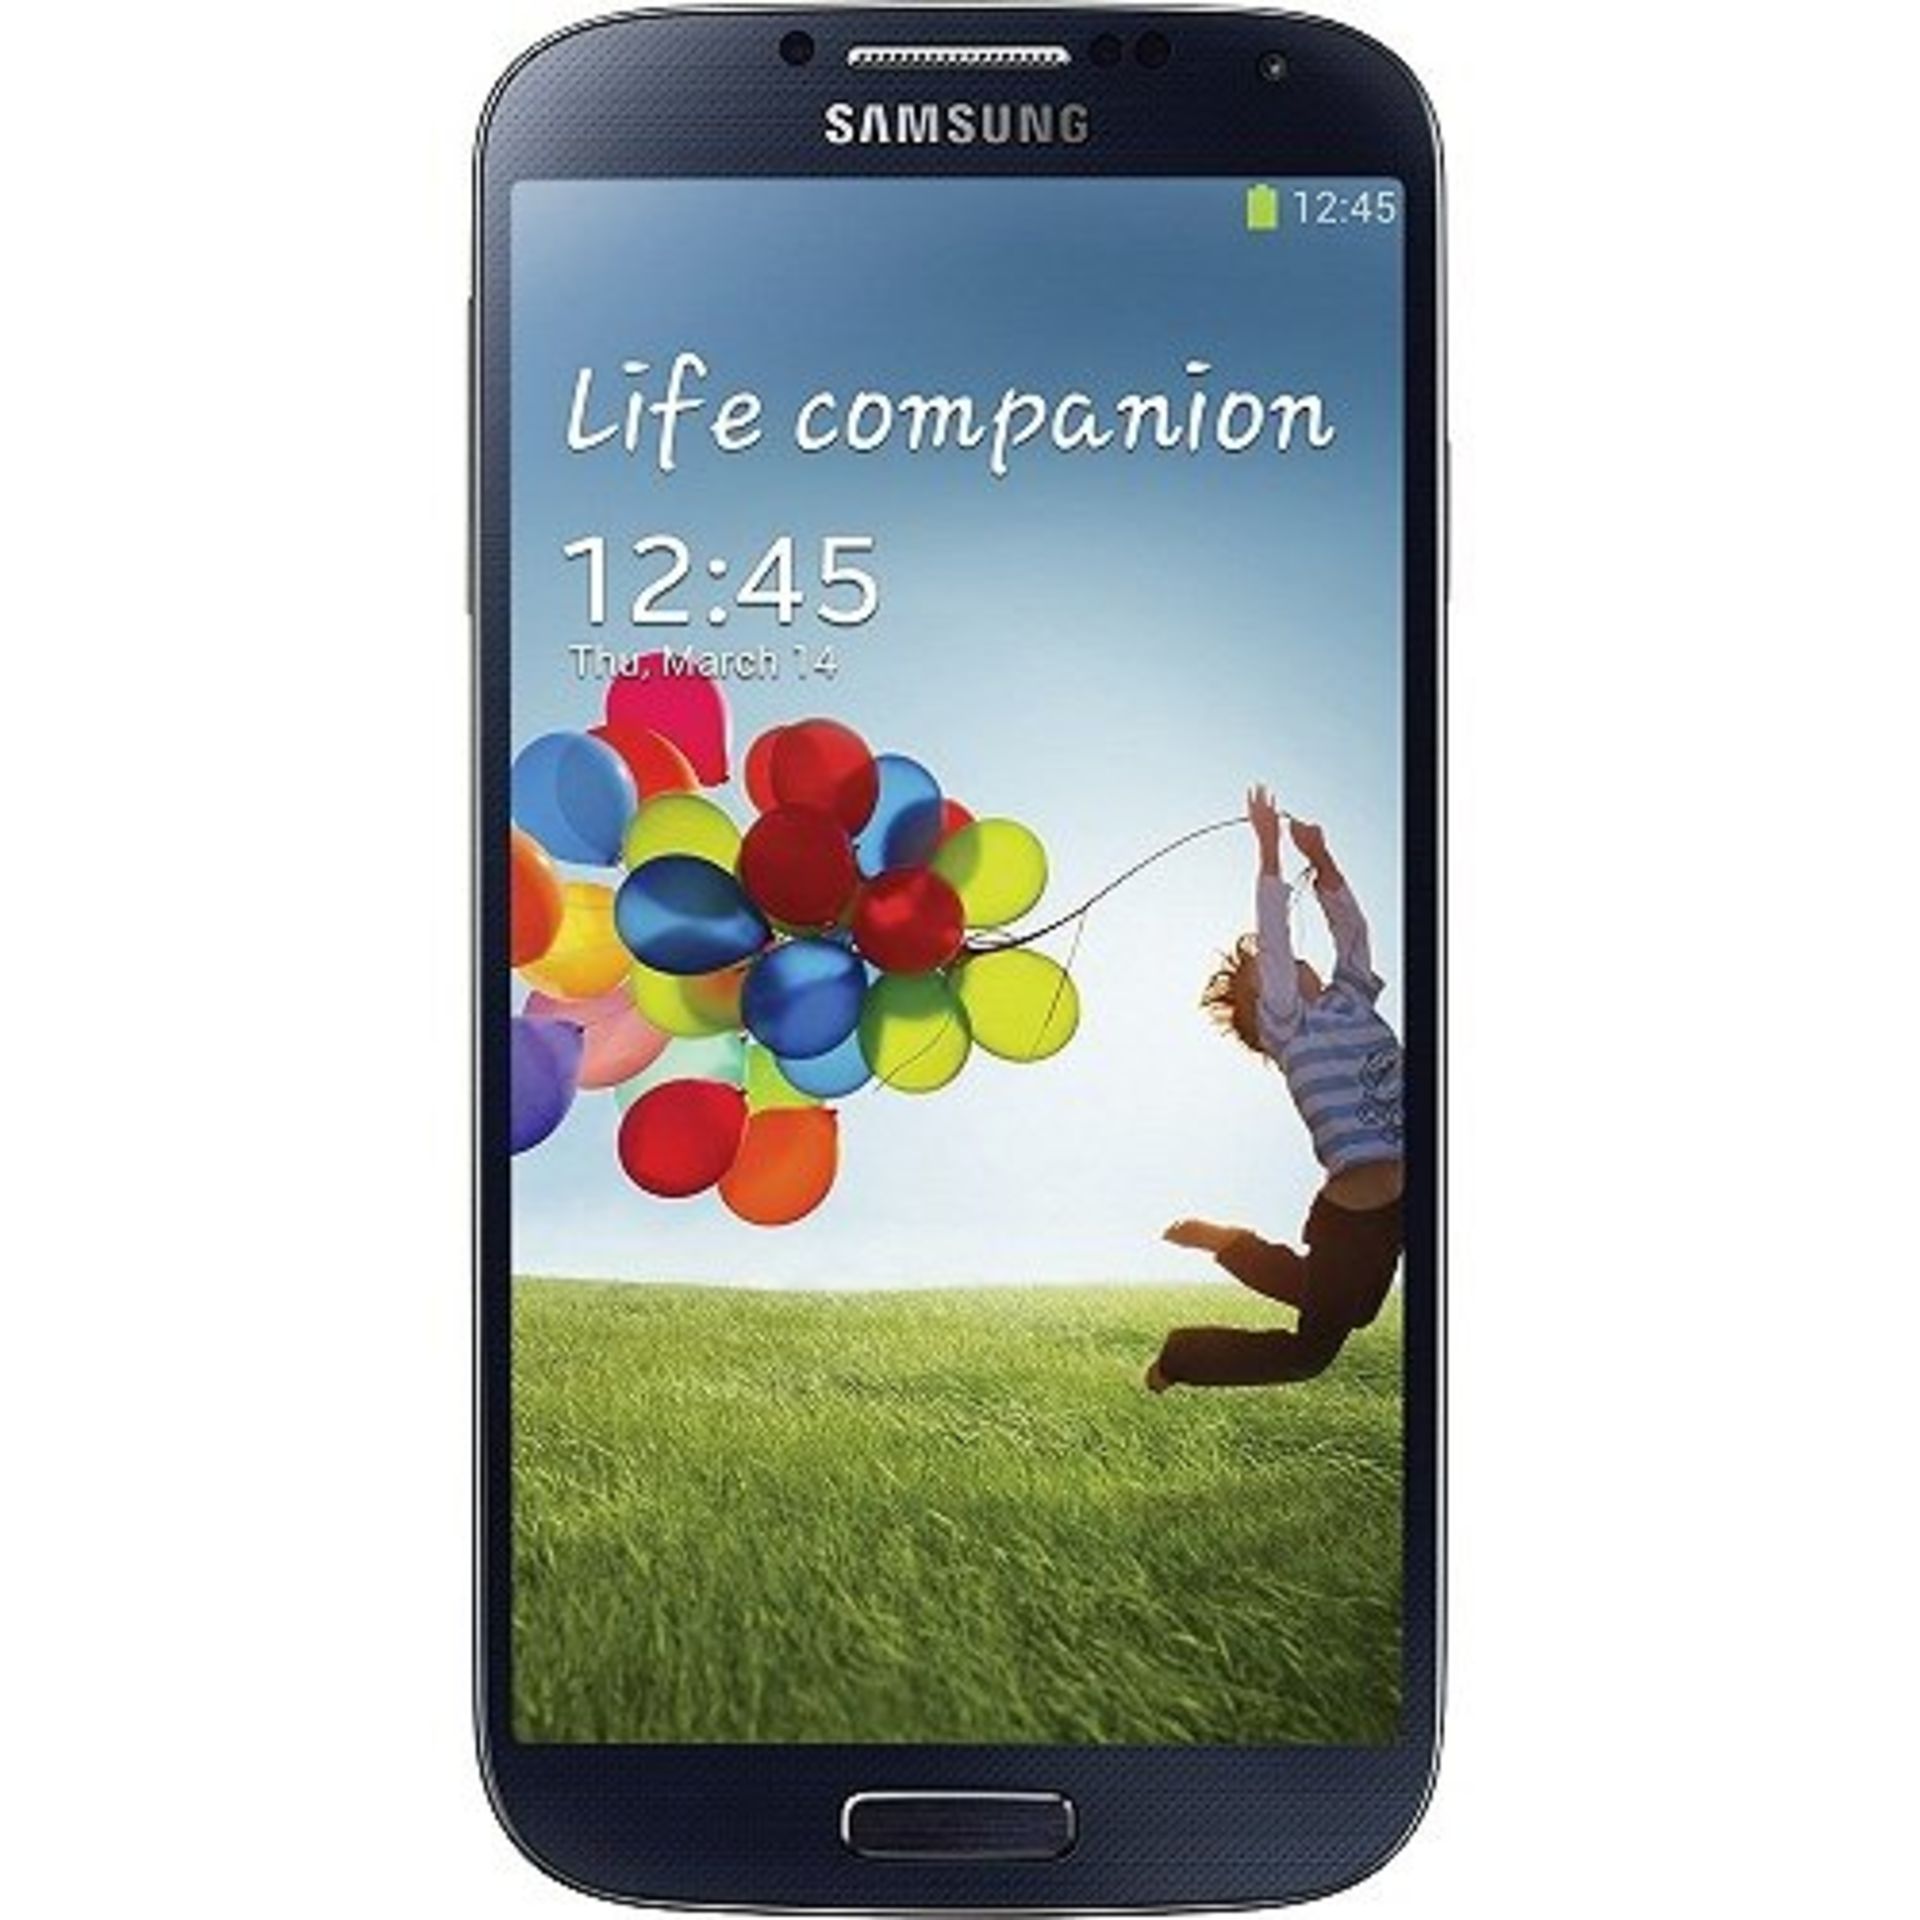 No VAT Grade A Samsung S4(i9500) Colours May Vary Item available approx 15 working days after sale